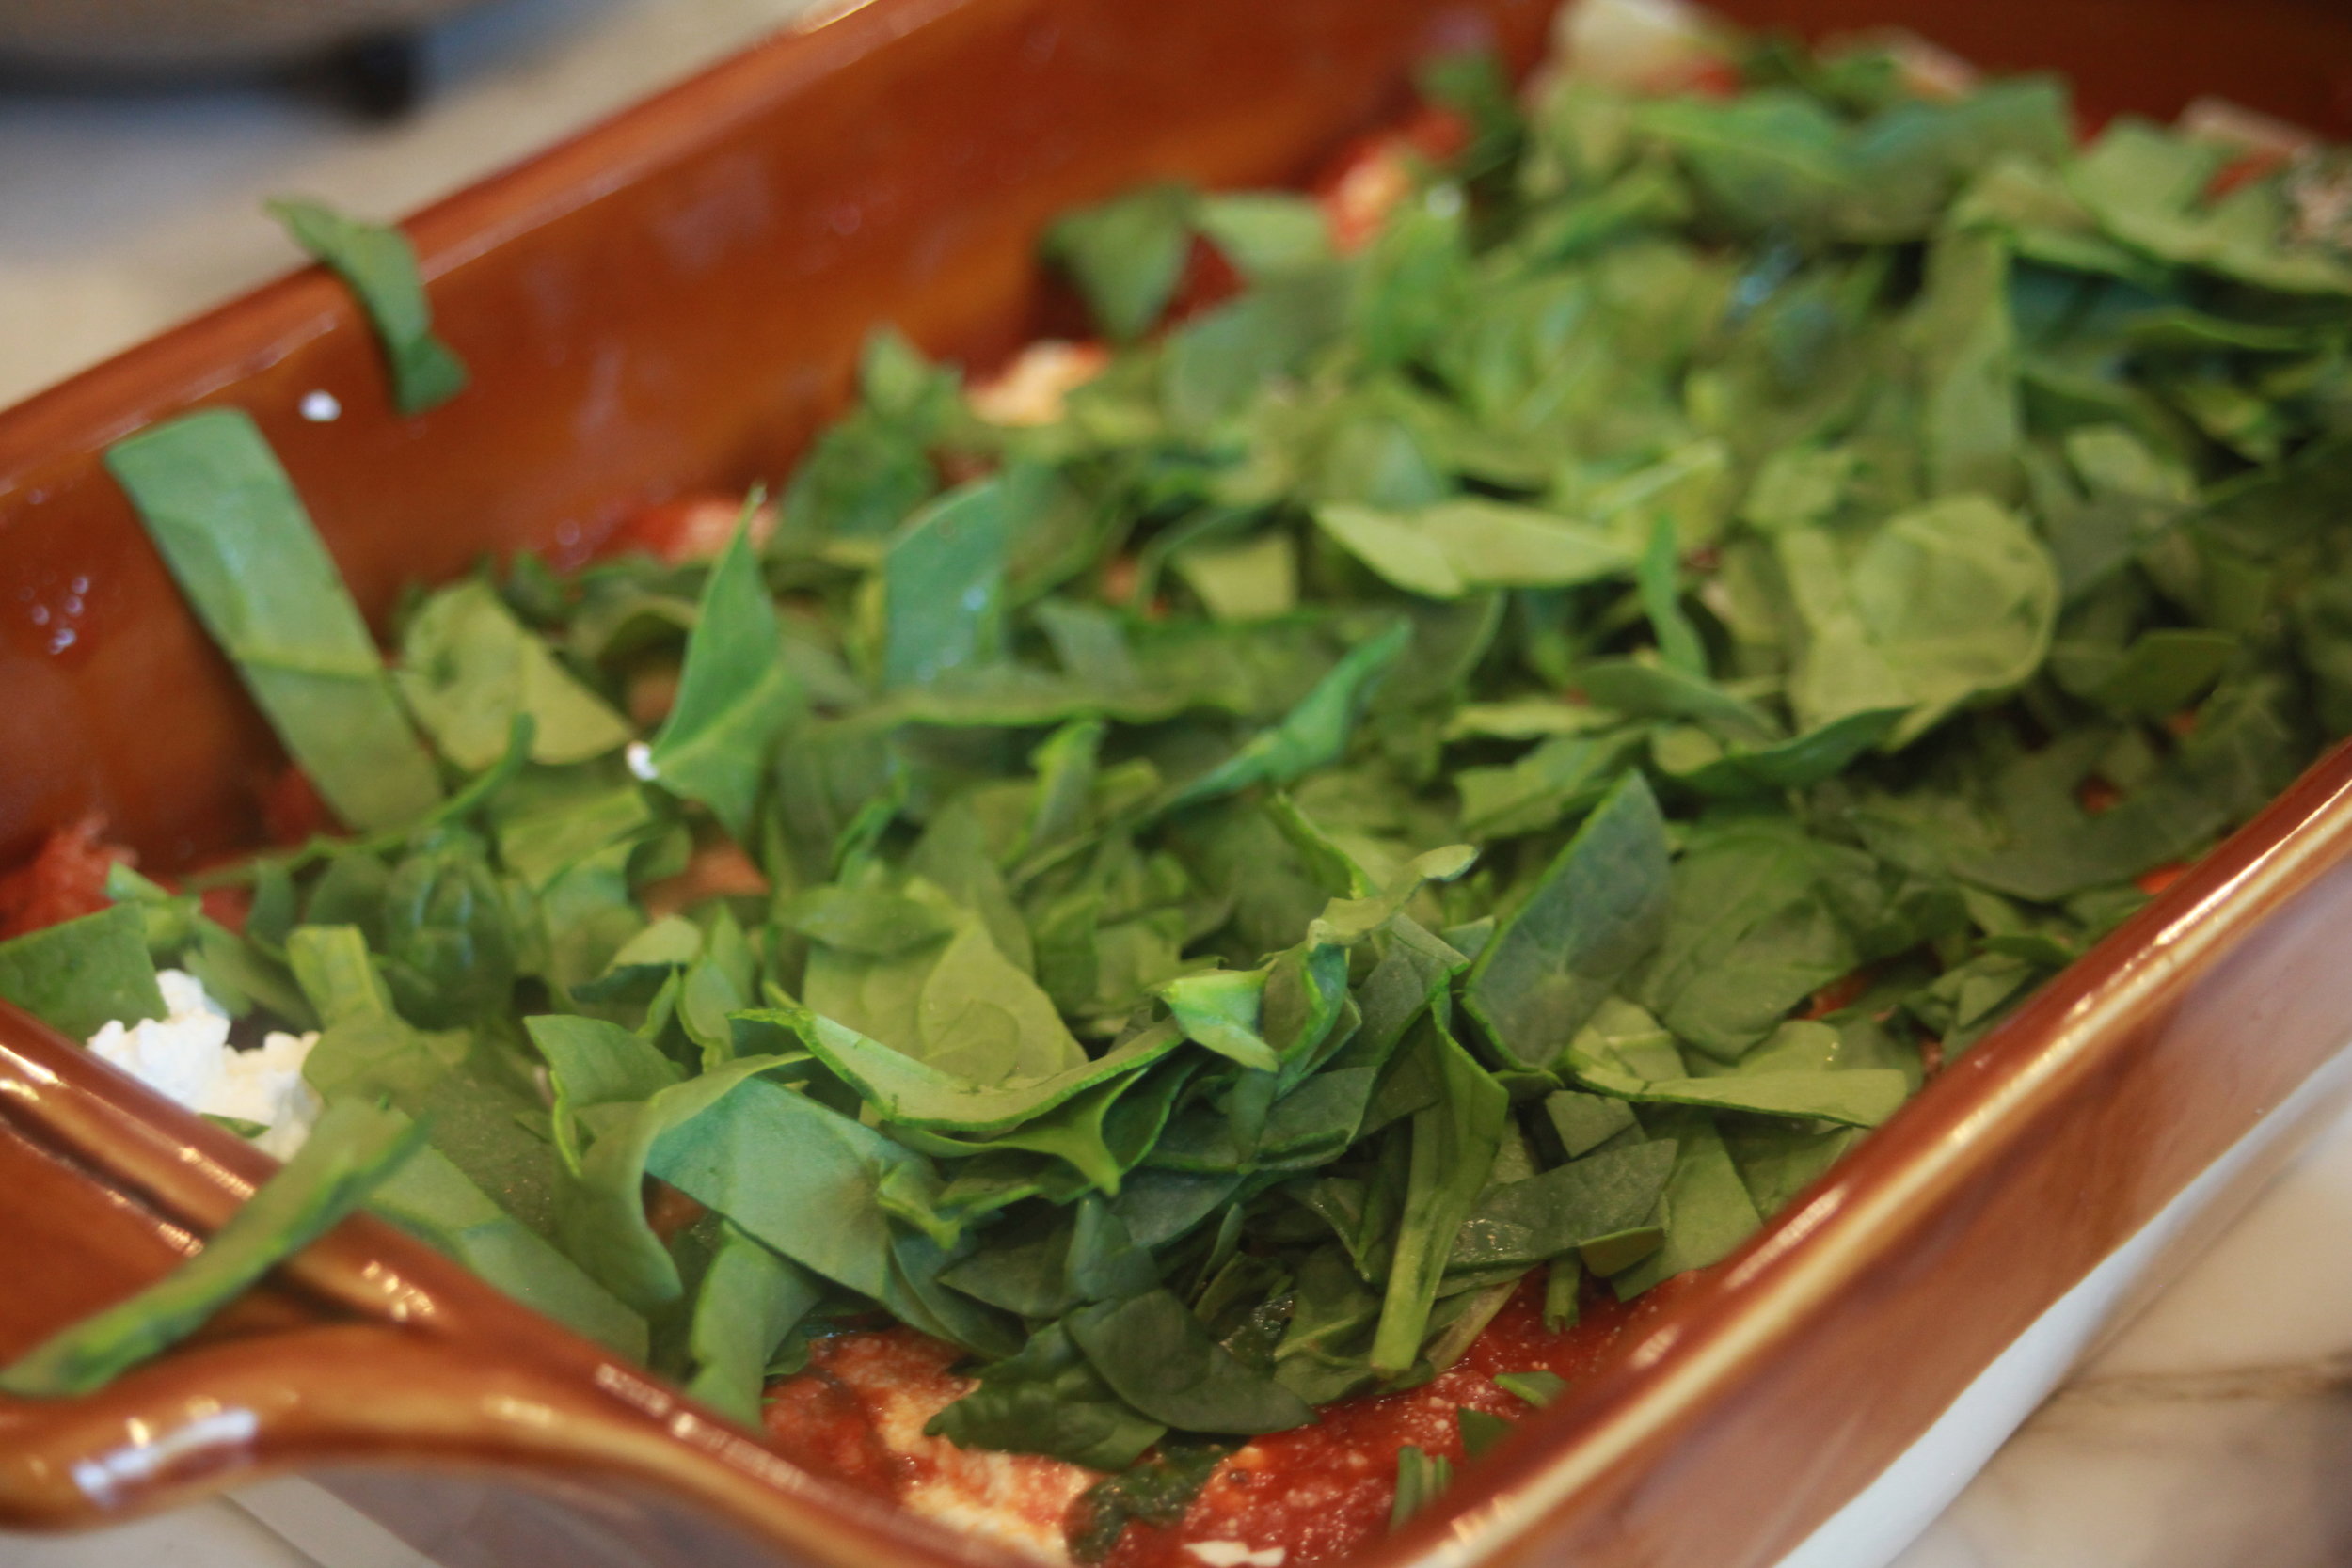 Lasagna assembly (spinach layer)